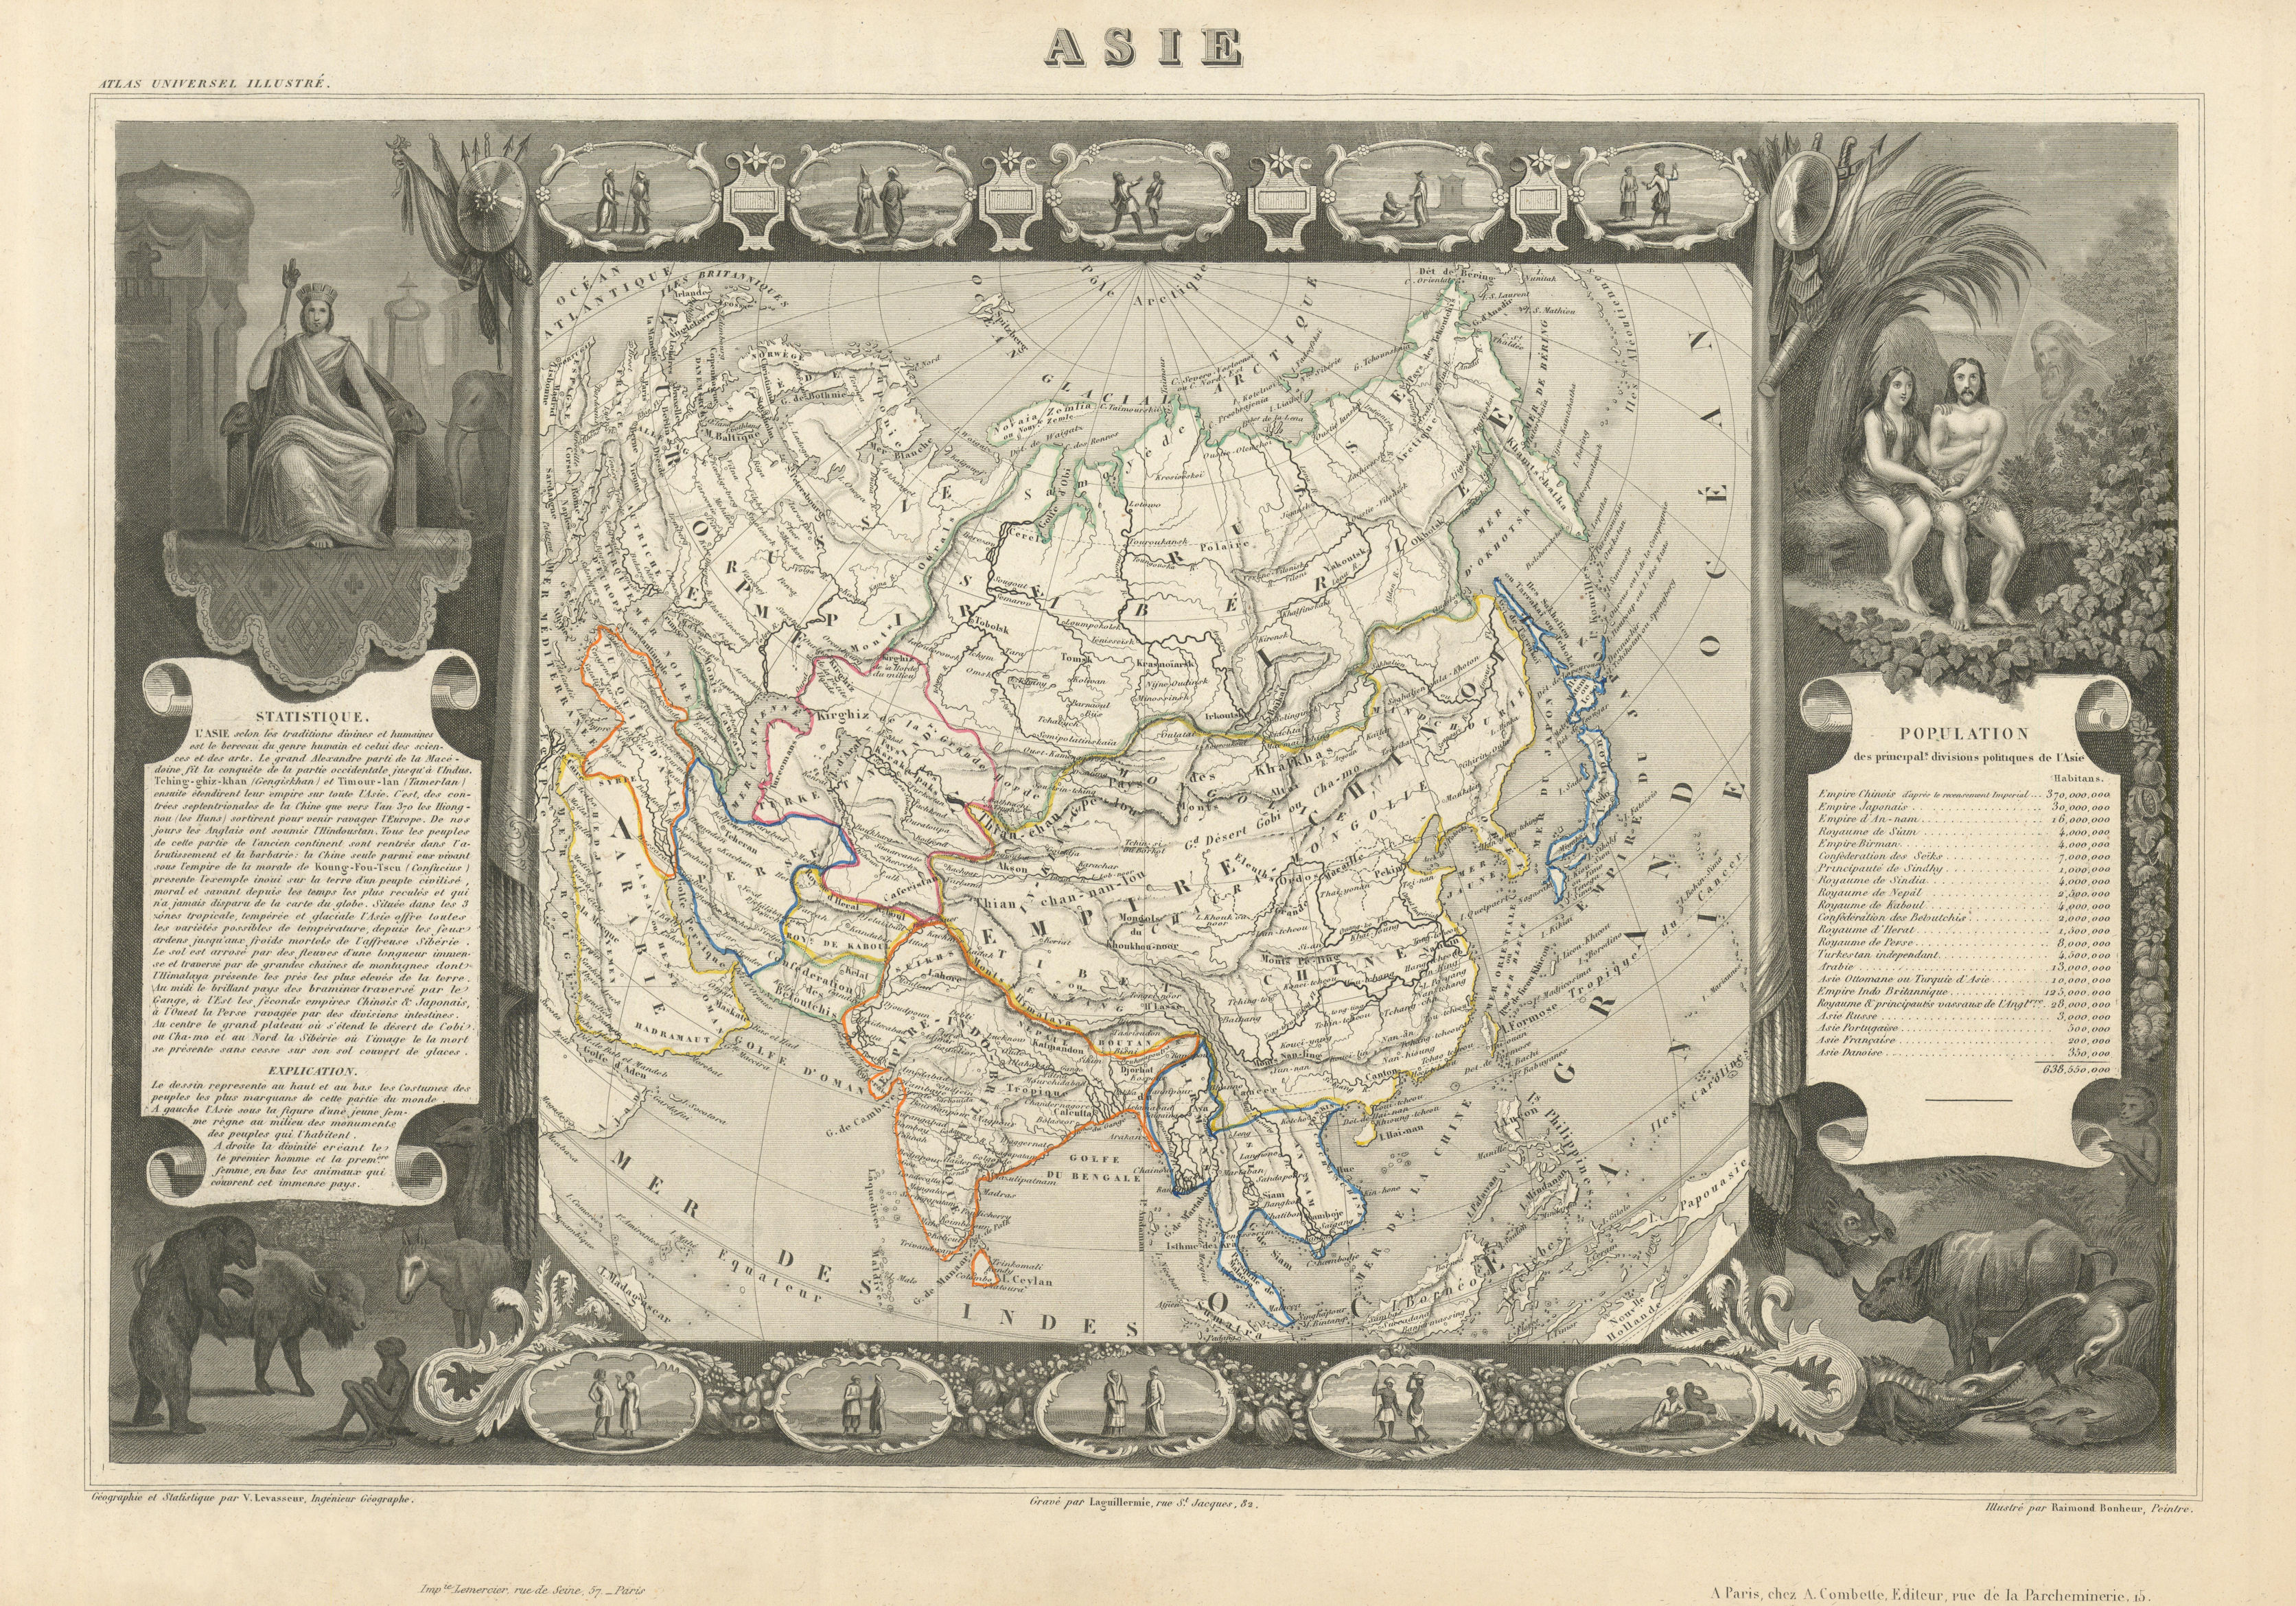 Associate Product ASIE. Asia. Decorative antique map/carte by Victor LEVASSEUR 1856 old